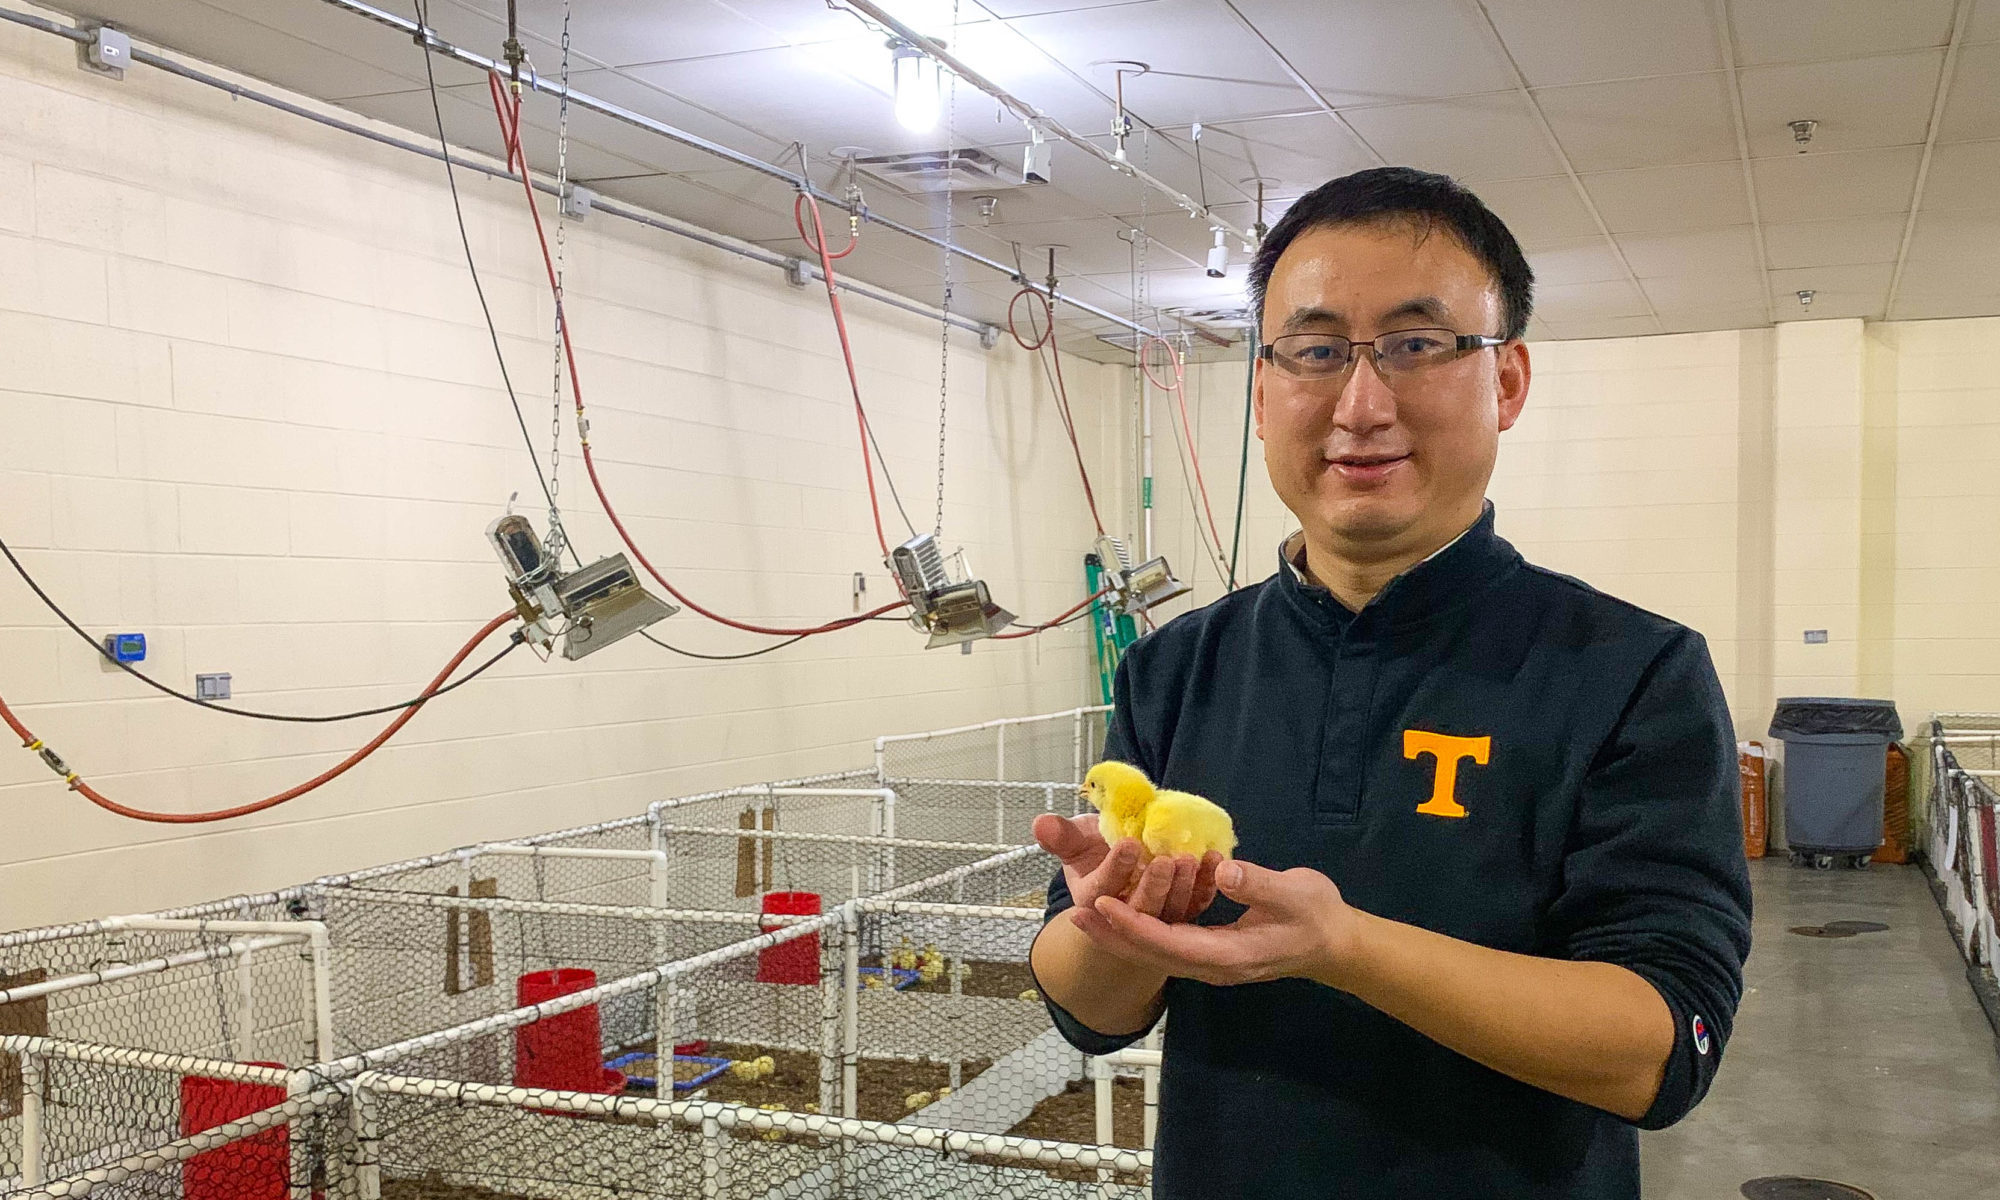 Yang Zhao holding a baby chick